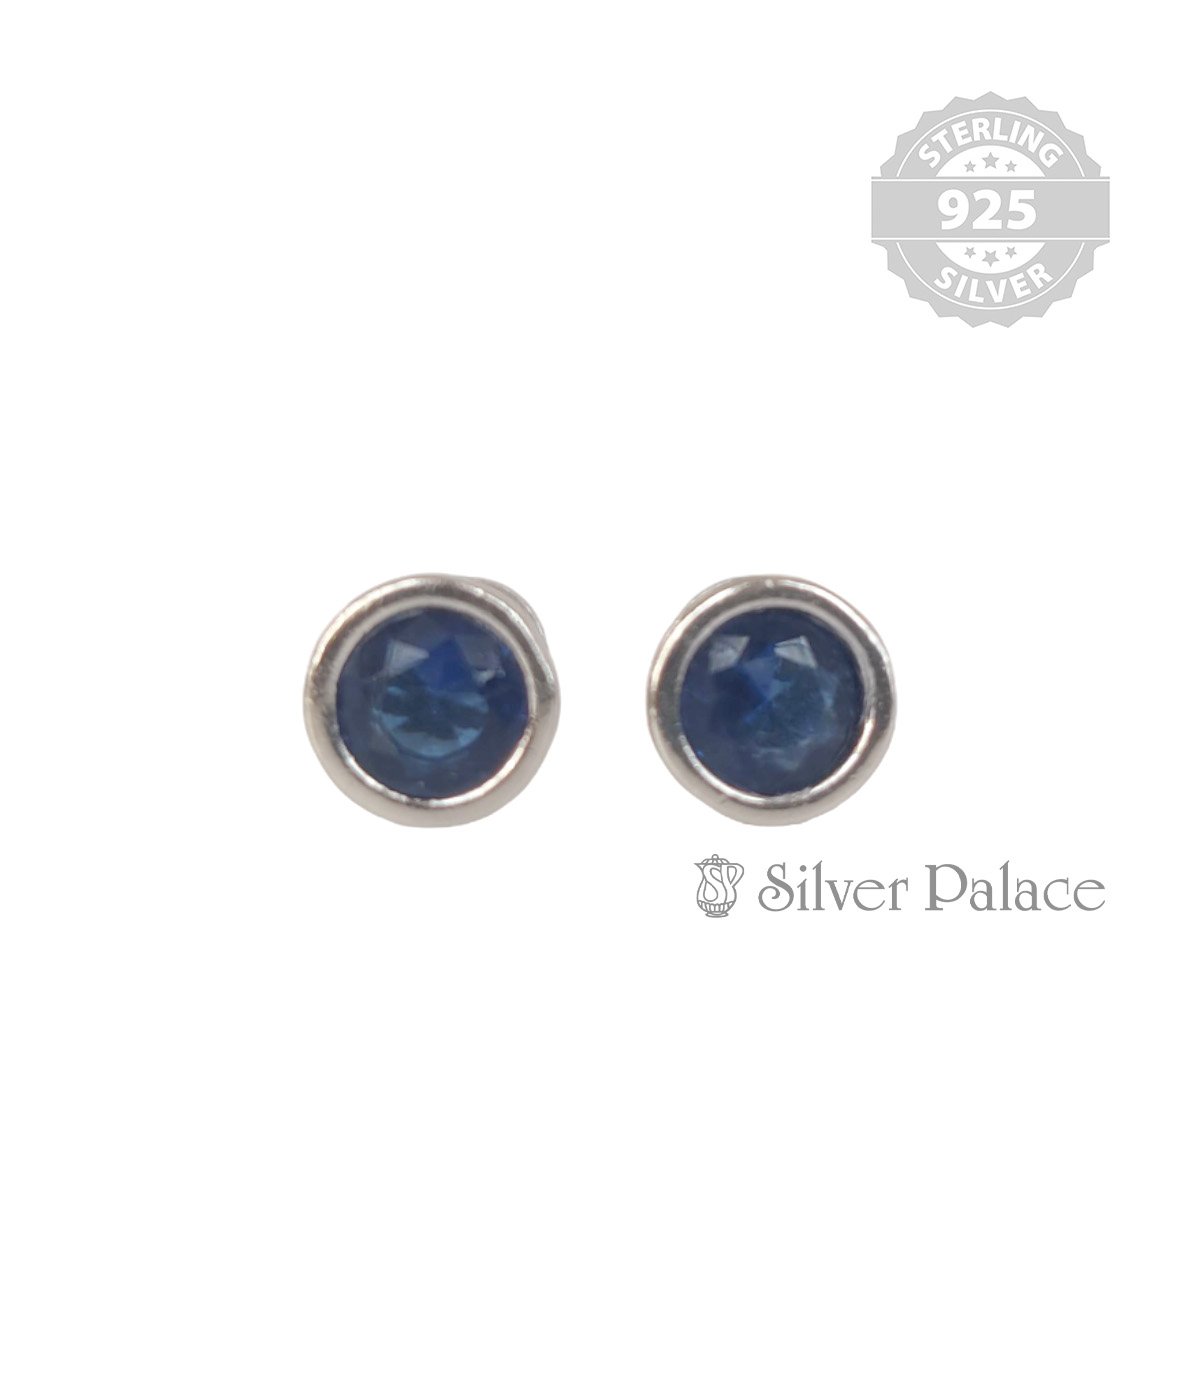 92.5 STERLING SILVER ROUND SHAPE BLUE STONE STUD